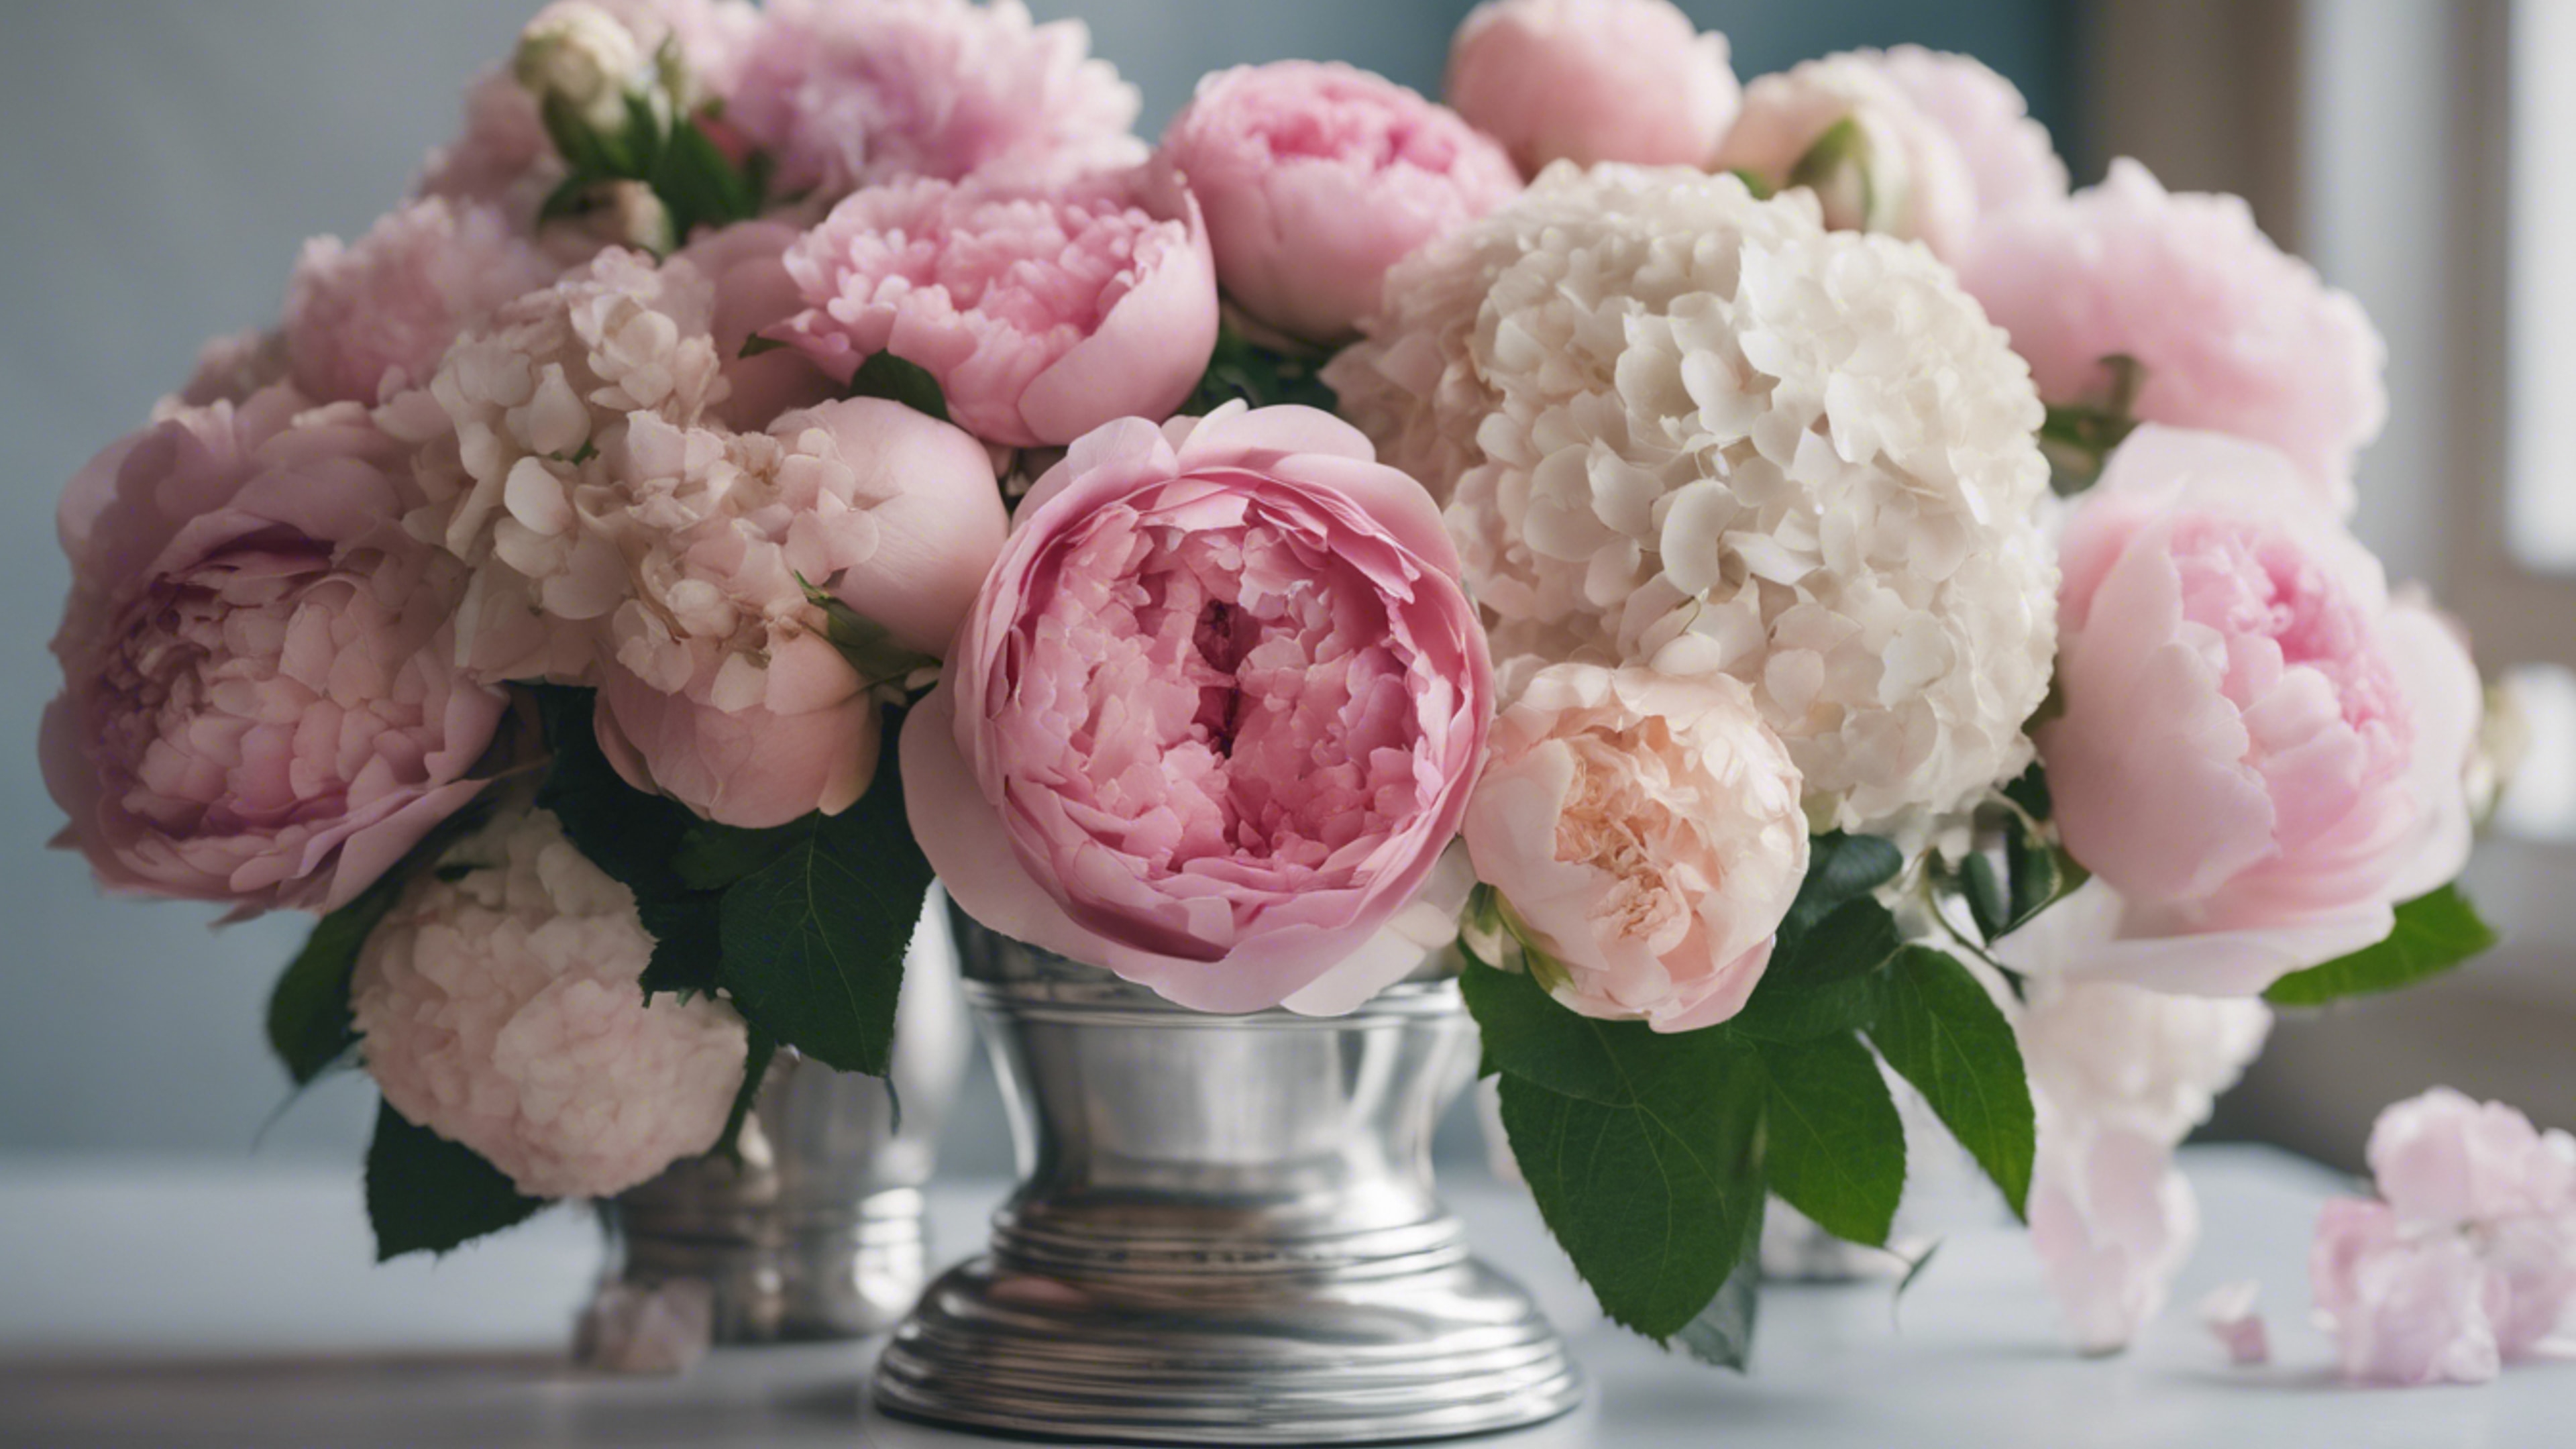 An arrangement of pink roses, peonies, and hydrangeas in a silver vase, embodying preppy elegance. Hintergrund[810d260cf91945bd97fc]